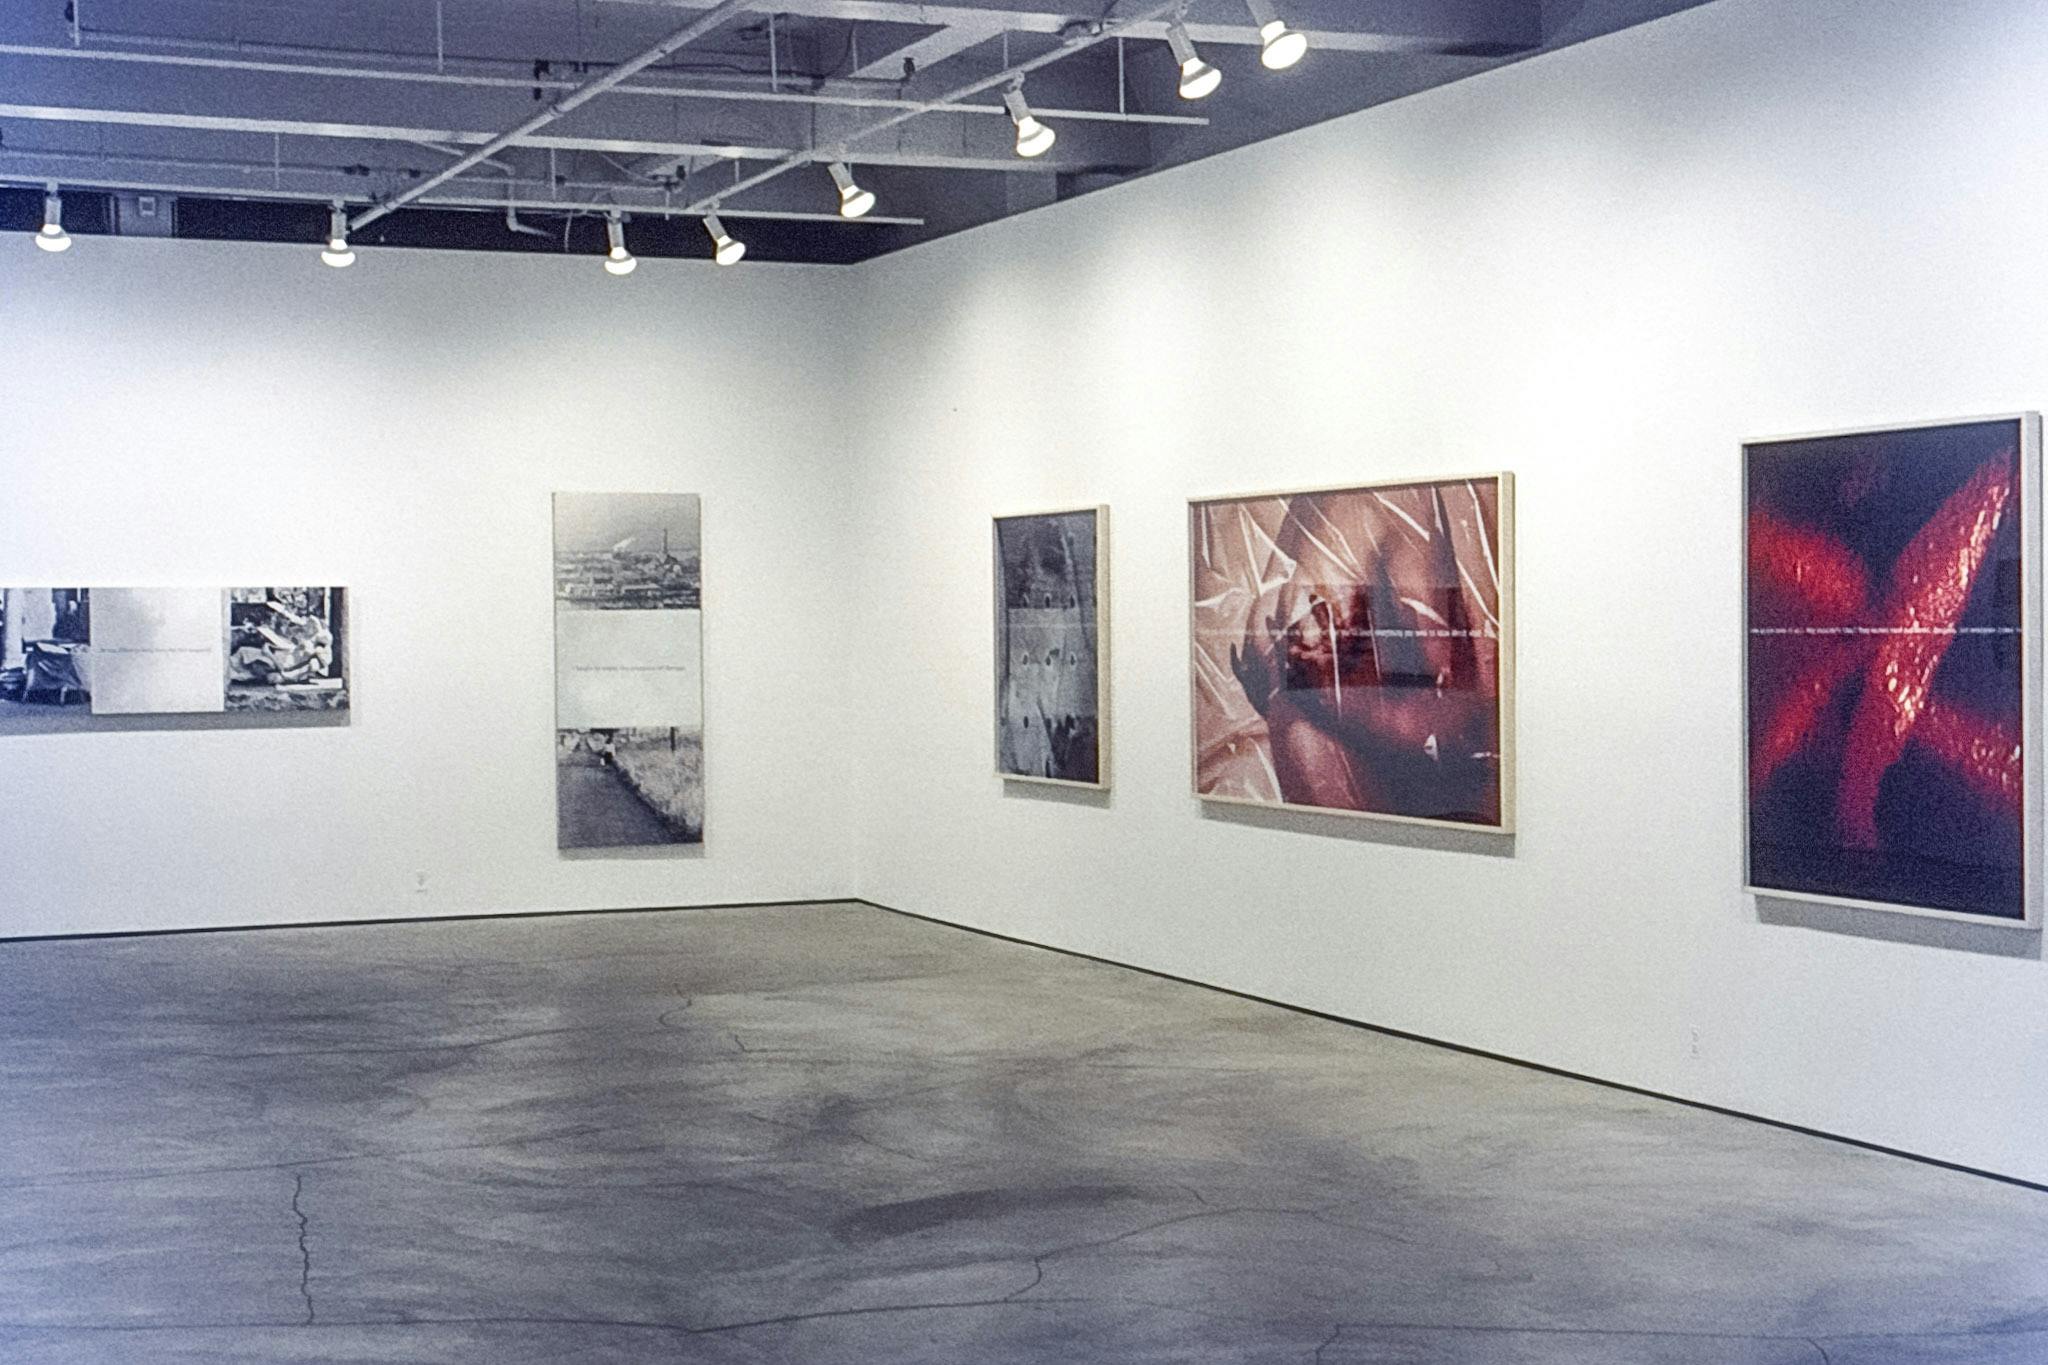 Five photo pieces mounted on the gallery walls. Three of them are black and white, and the rest are colored; one depicts a naked woman holding her breasts, and the other depicts red organic shapes. 